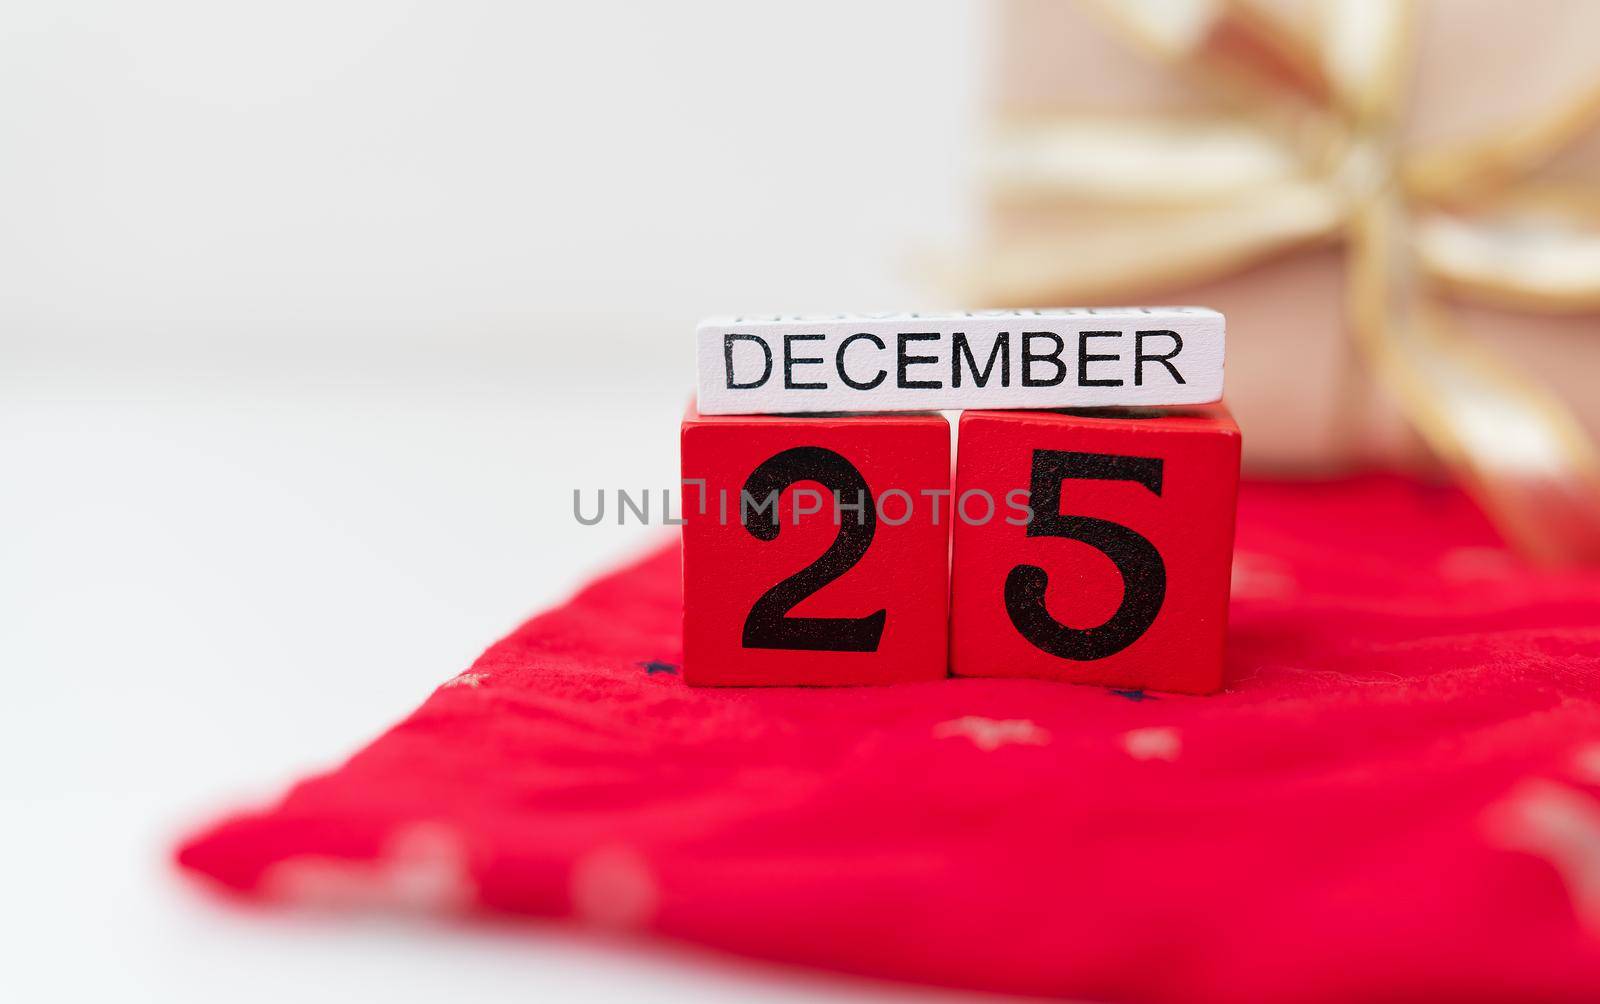 December 25 is lined with red cubes along with December lettering on a red Christmas background. Christmas Eve. by sfinks